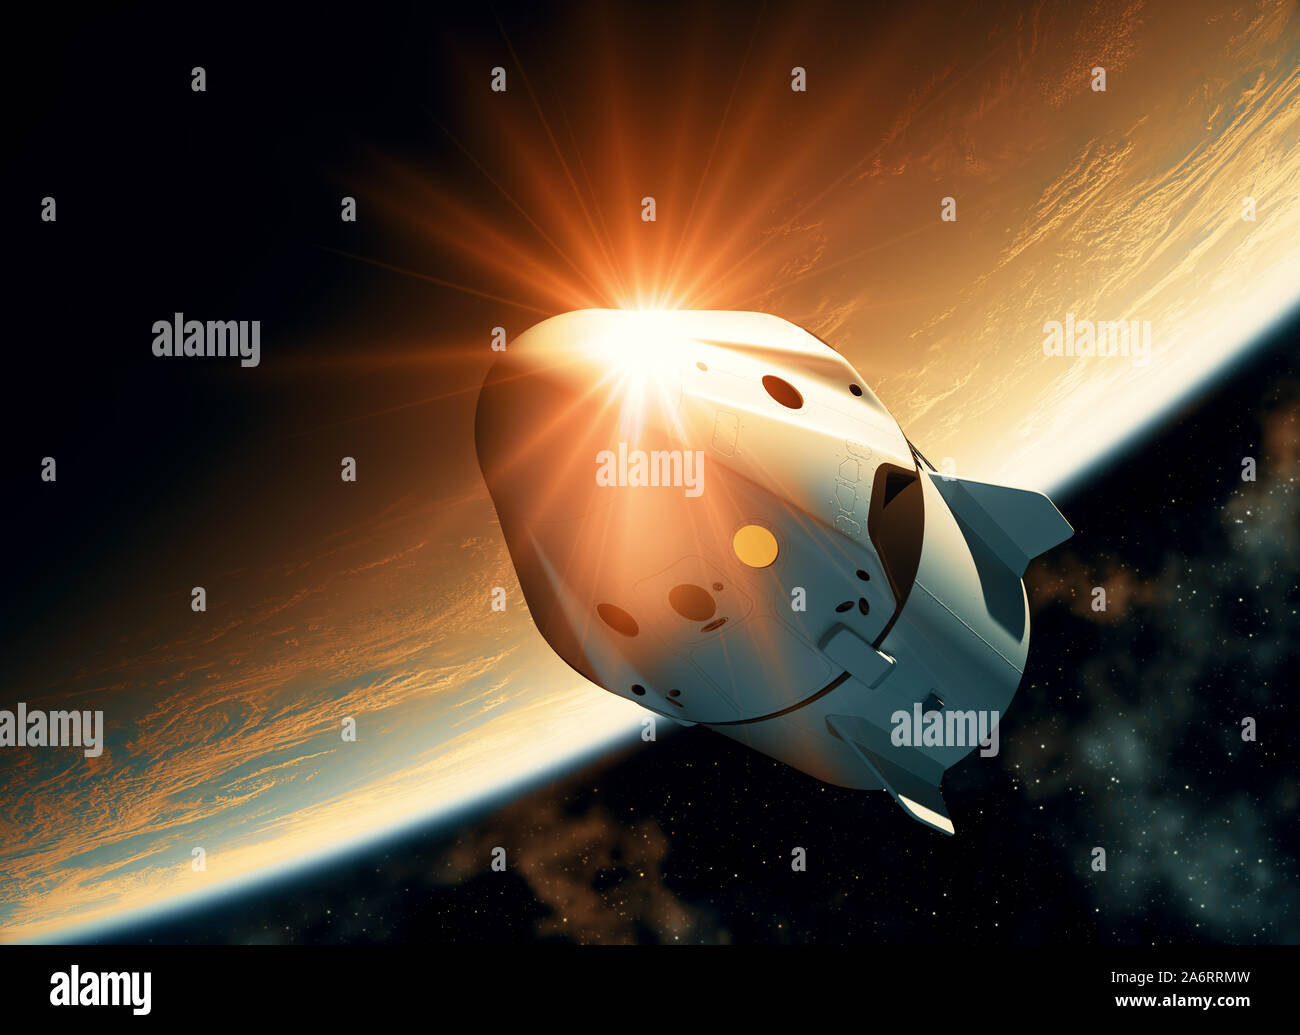 Sun Reflection On The Surface Of A Spacecraft Flying In Outer Space. 3D Illustration. Stock Photo